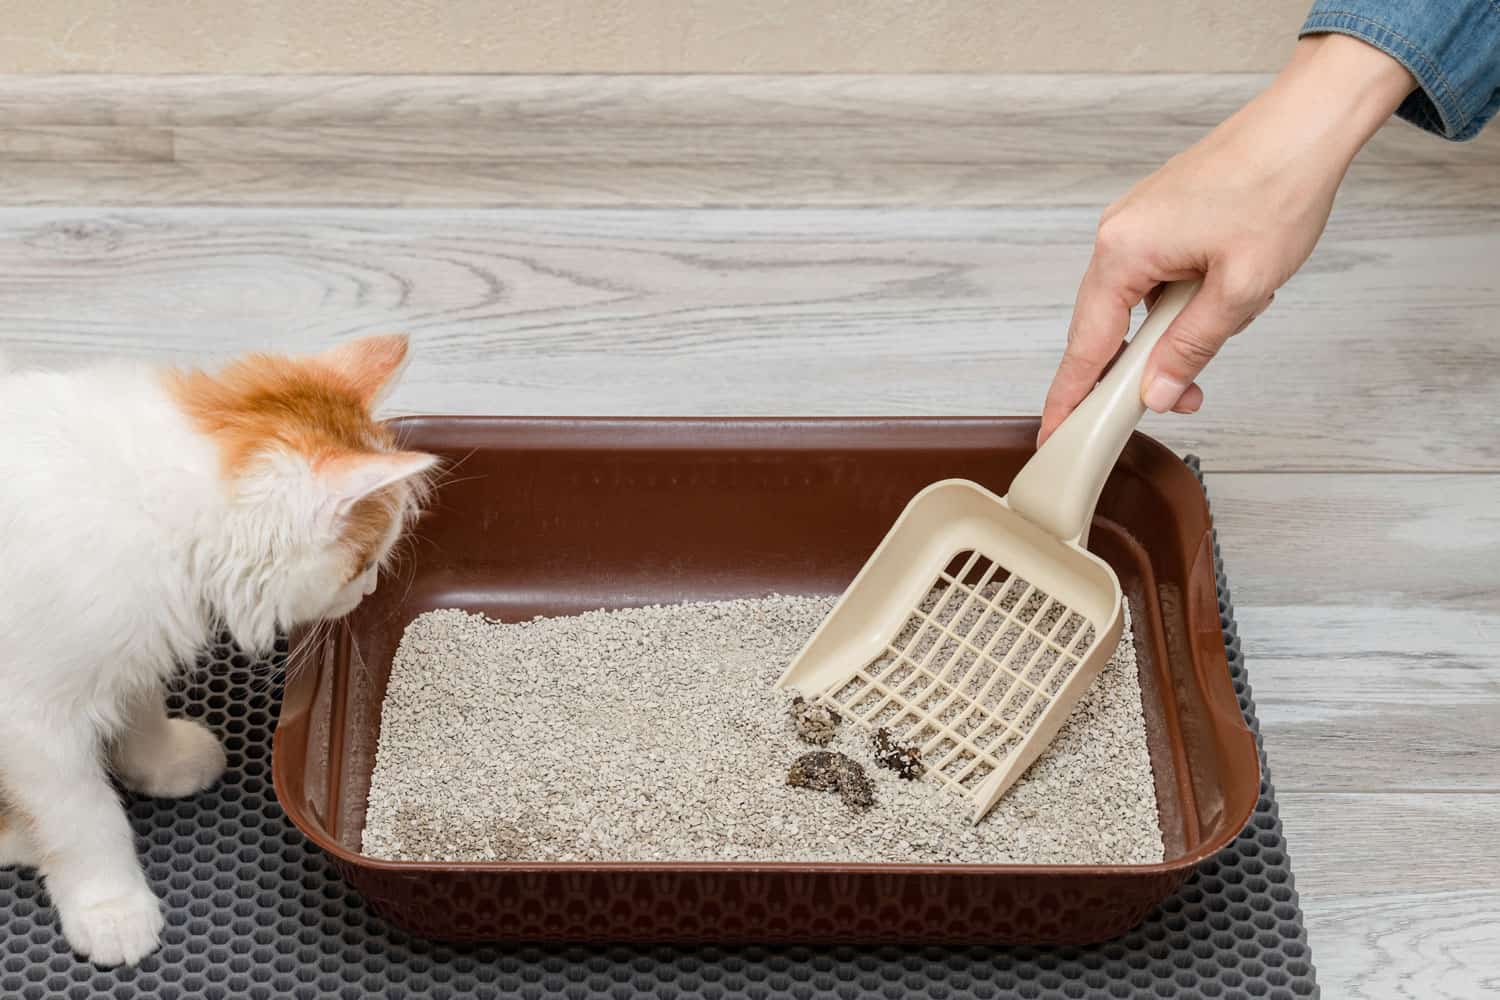 Cleaning cat litter